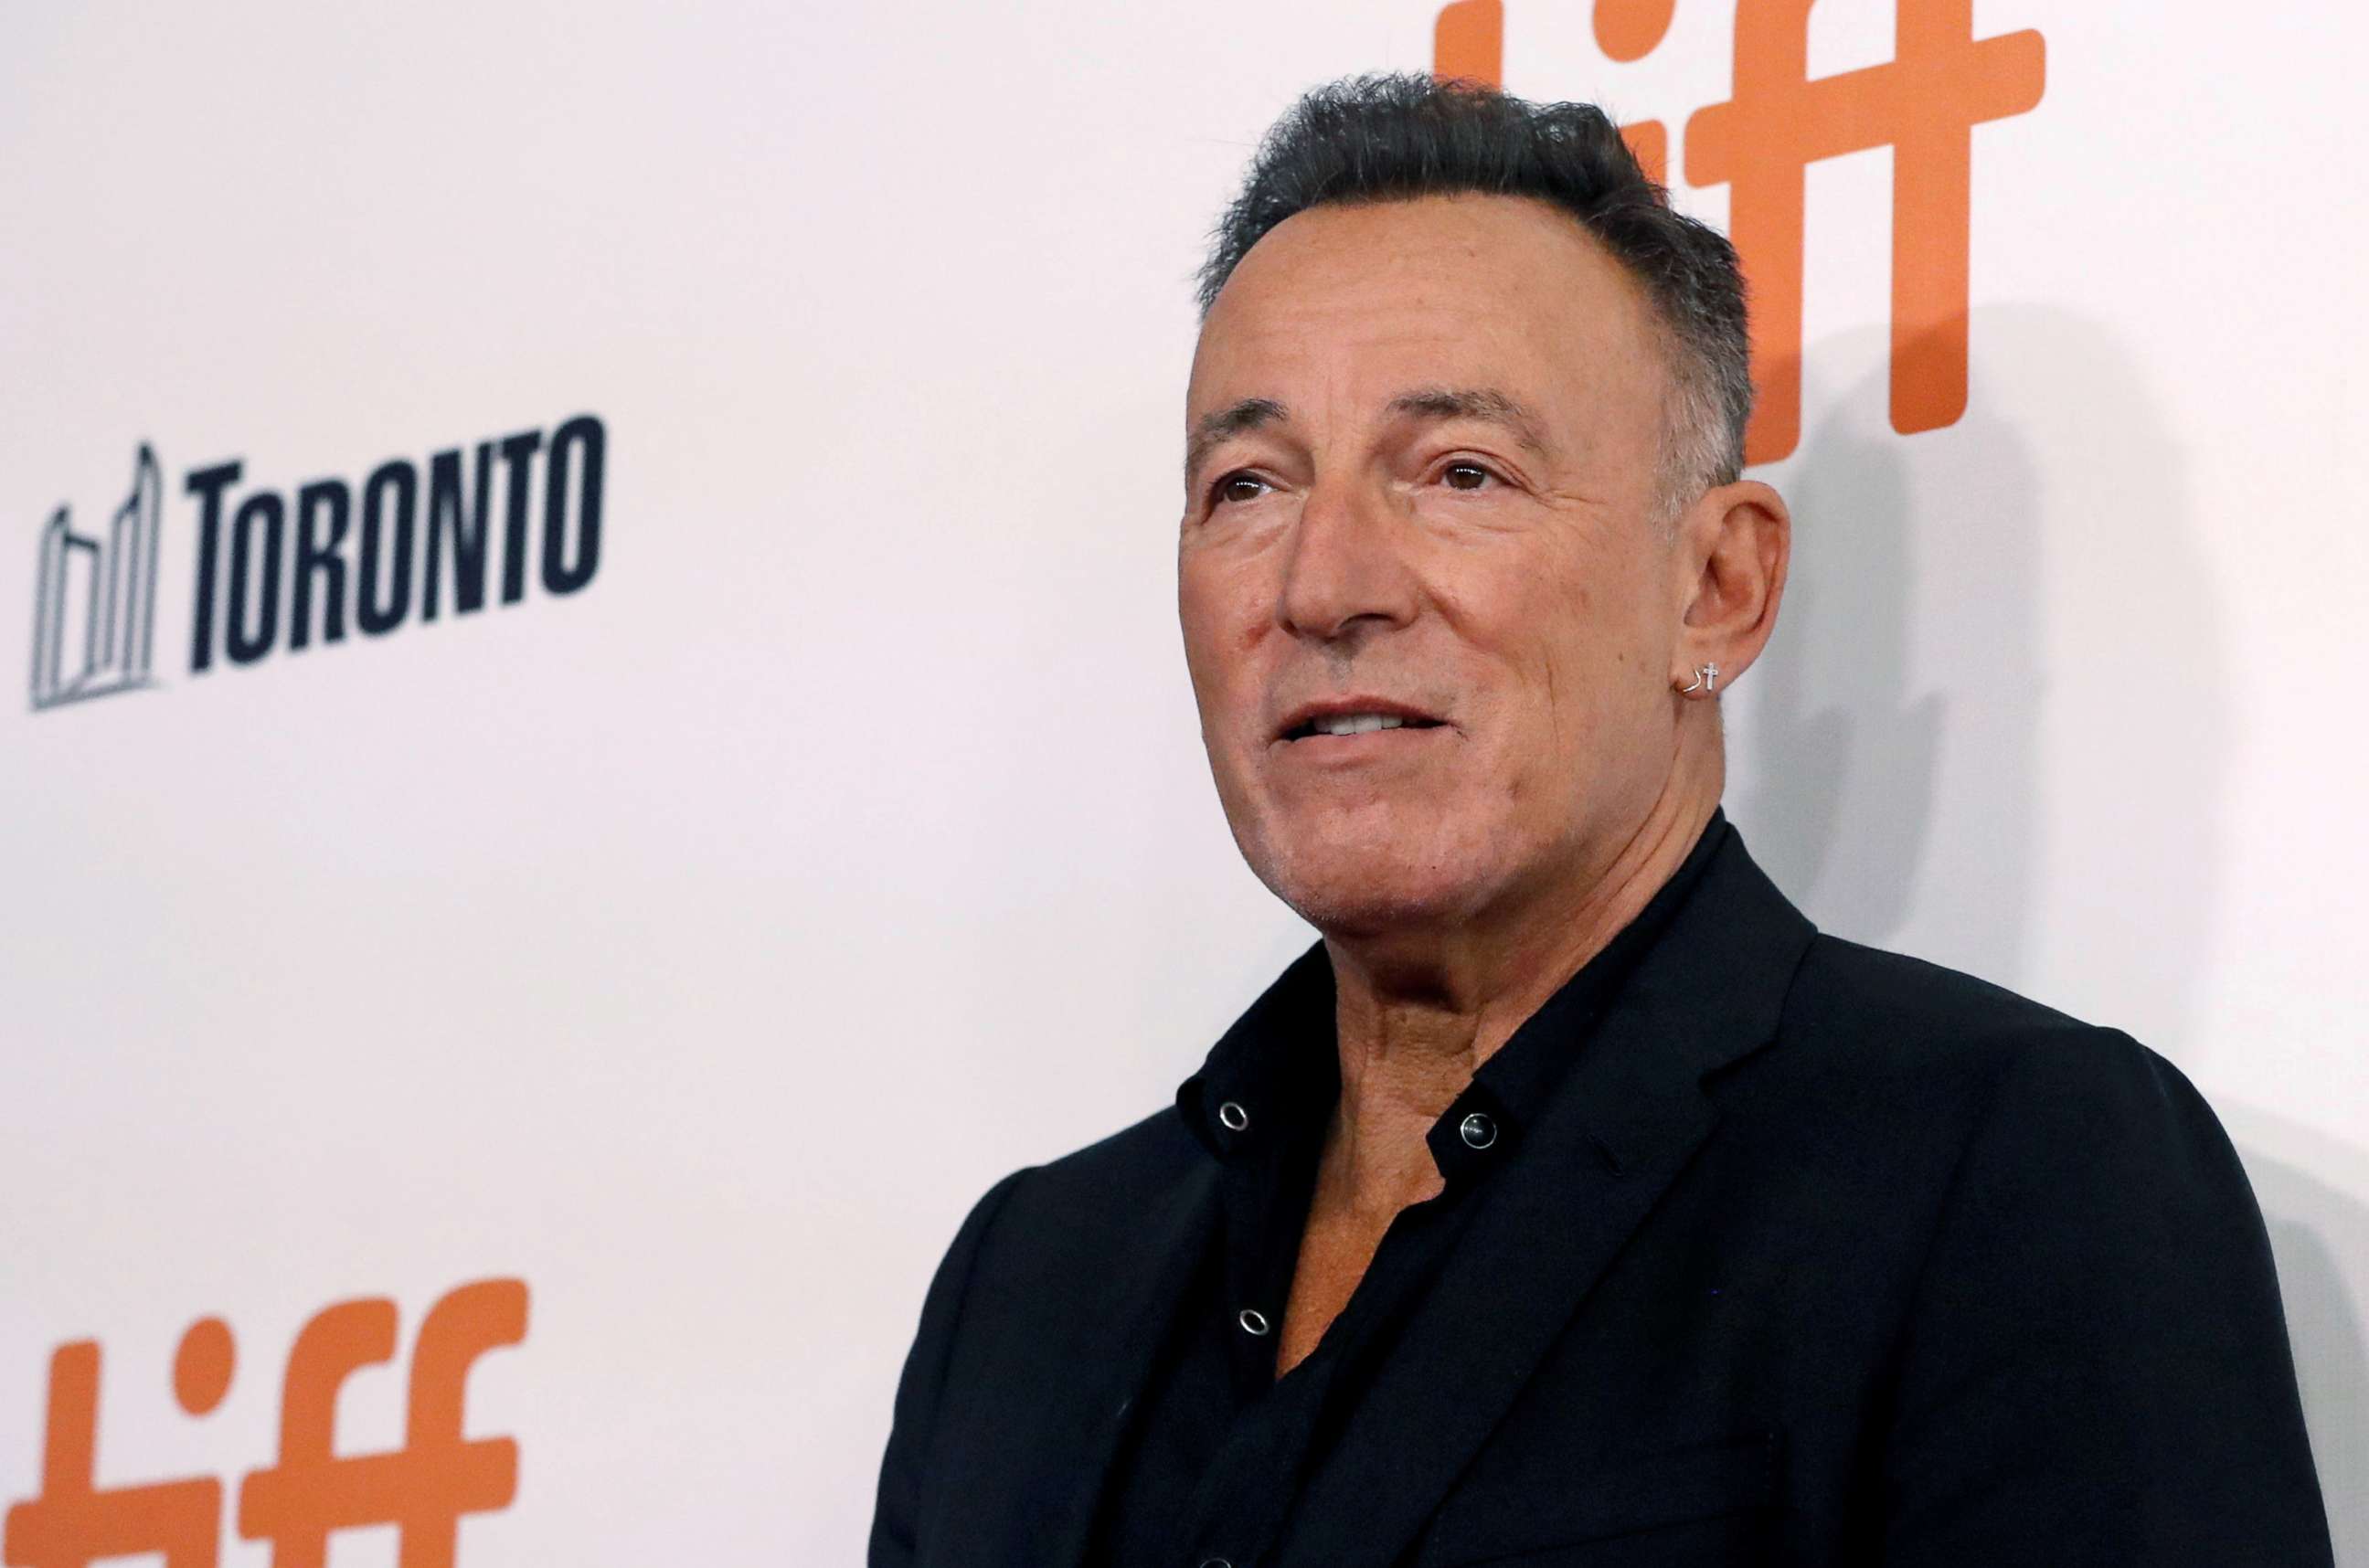 PHOTO: Bruce Springsteen arrives for a premiere, Sept. 12, 2019, in Toronto.